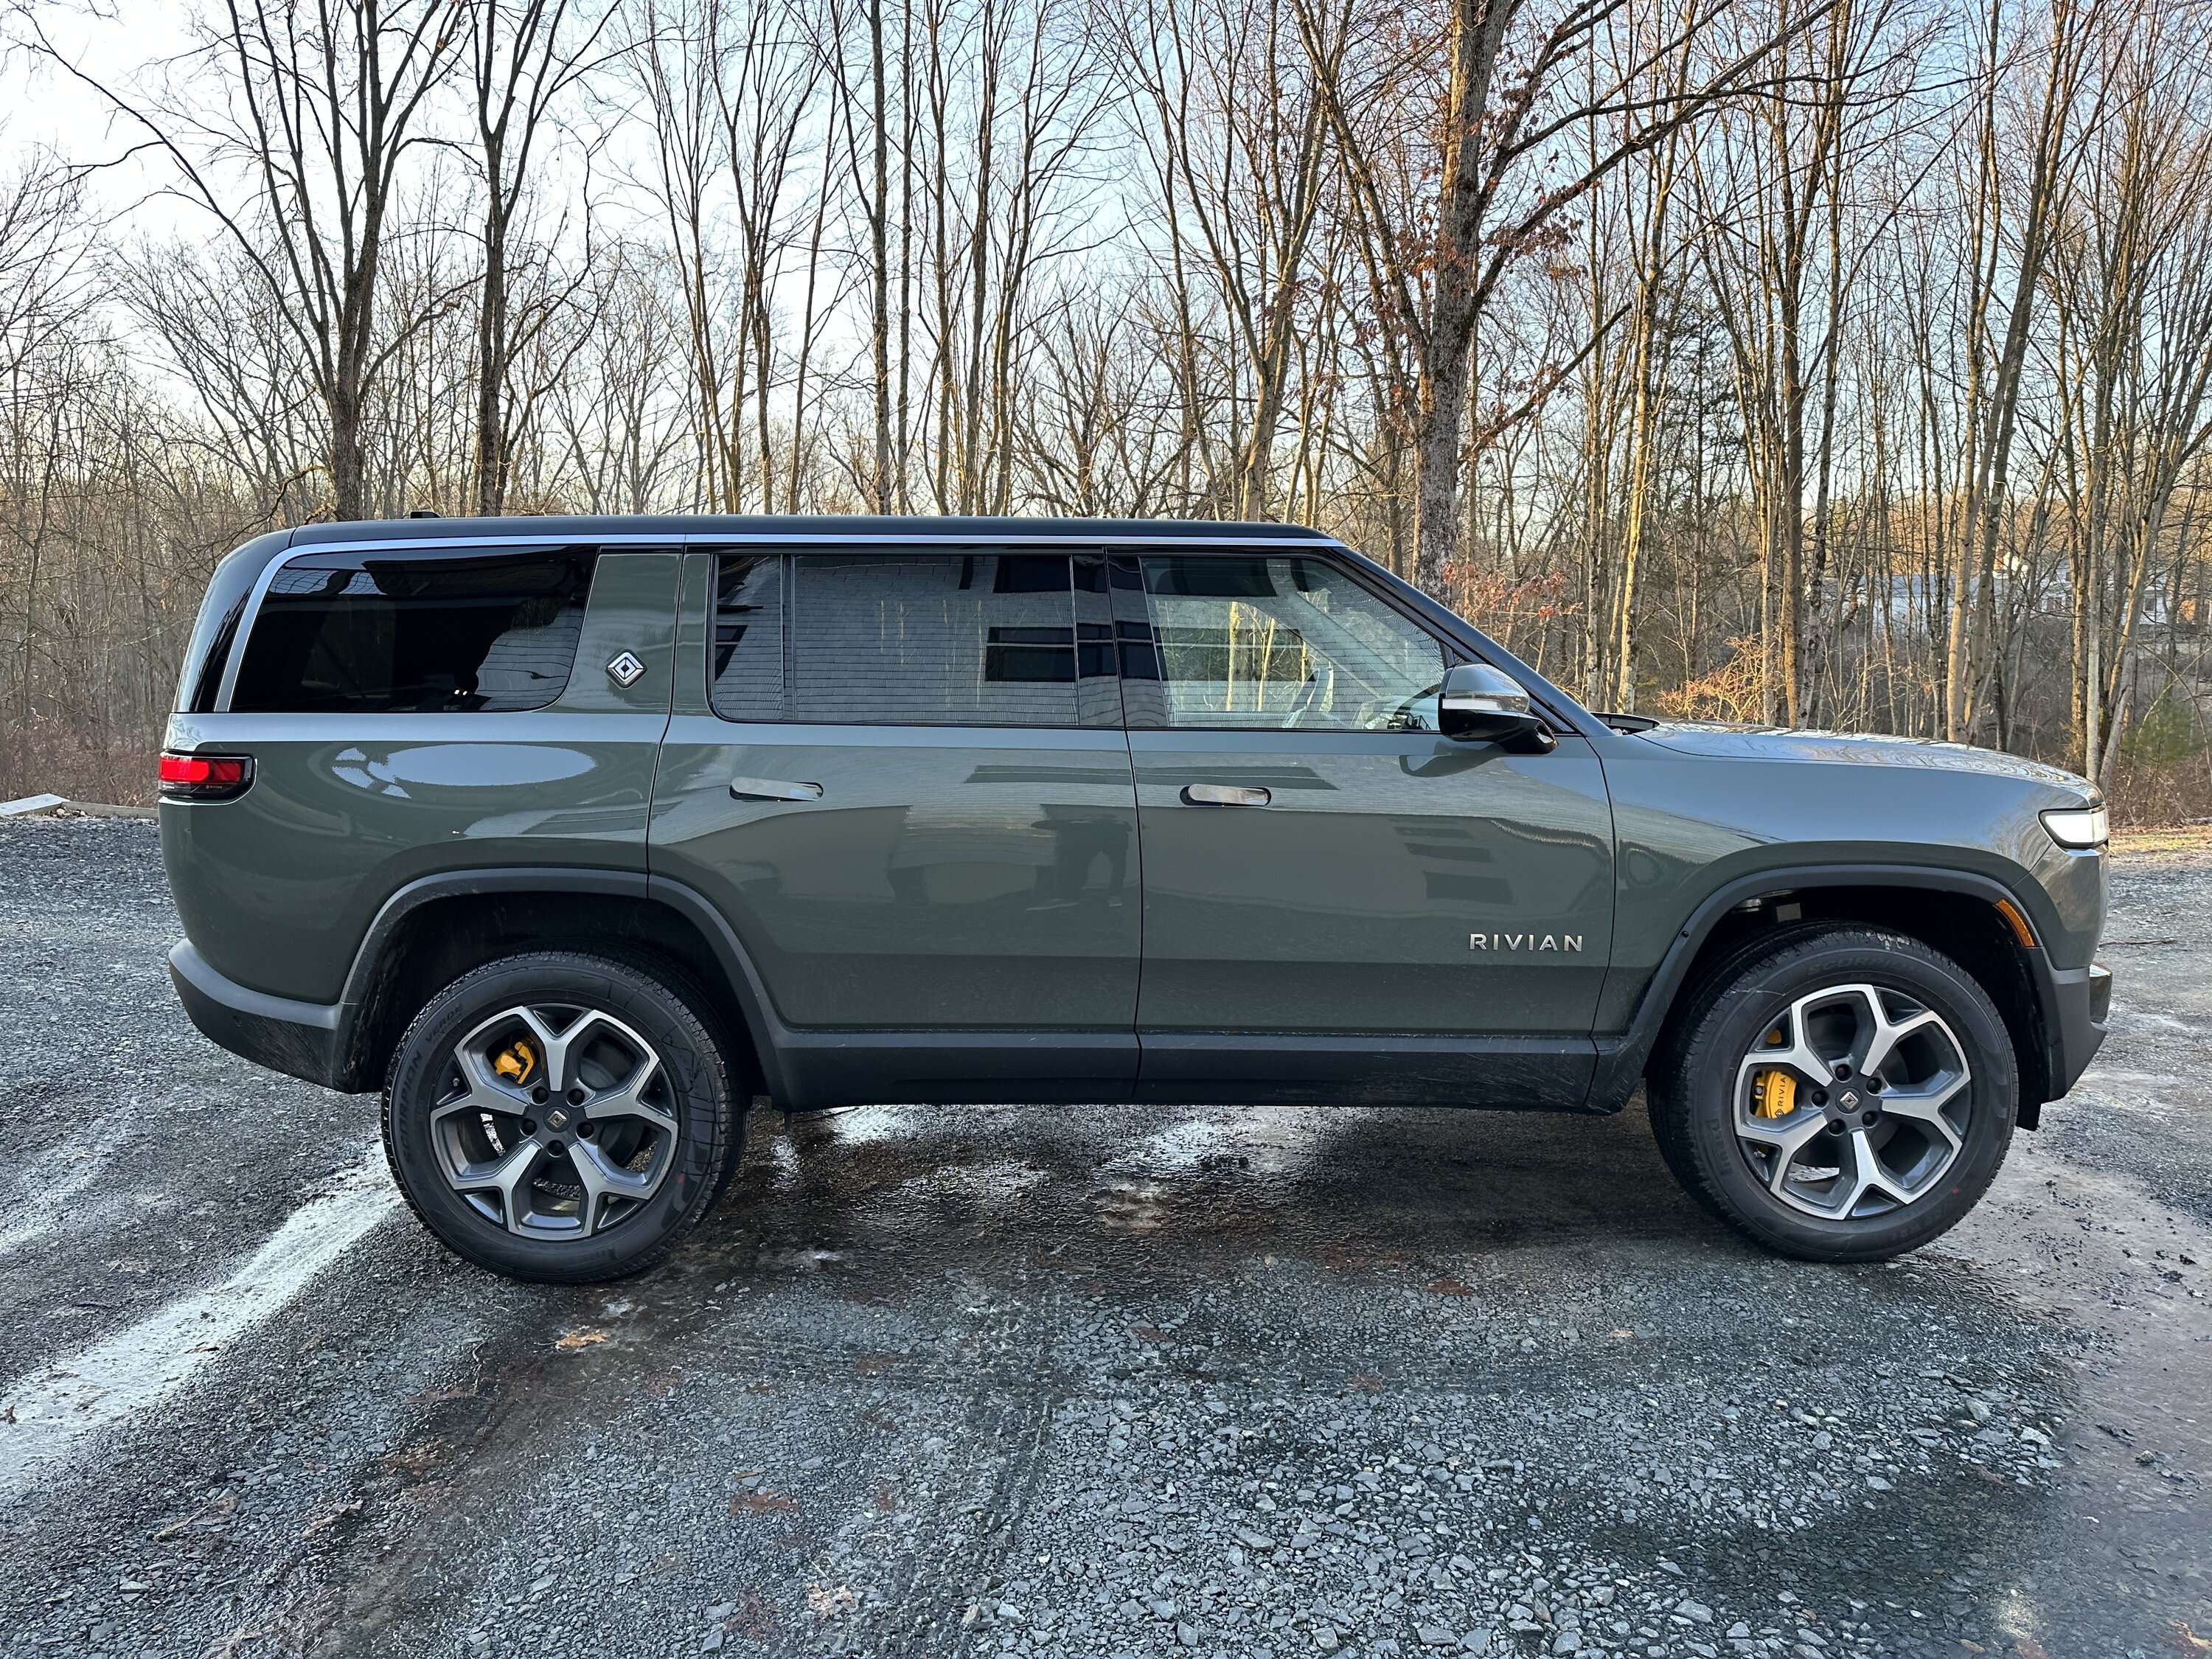 Rivian R1T R1S The wait ended today... R1S delivered after 846 days of waiting! 50770655-8258-4078-9C2D-E90EE4D75D42